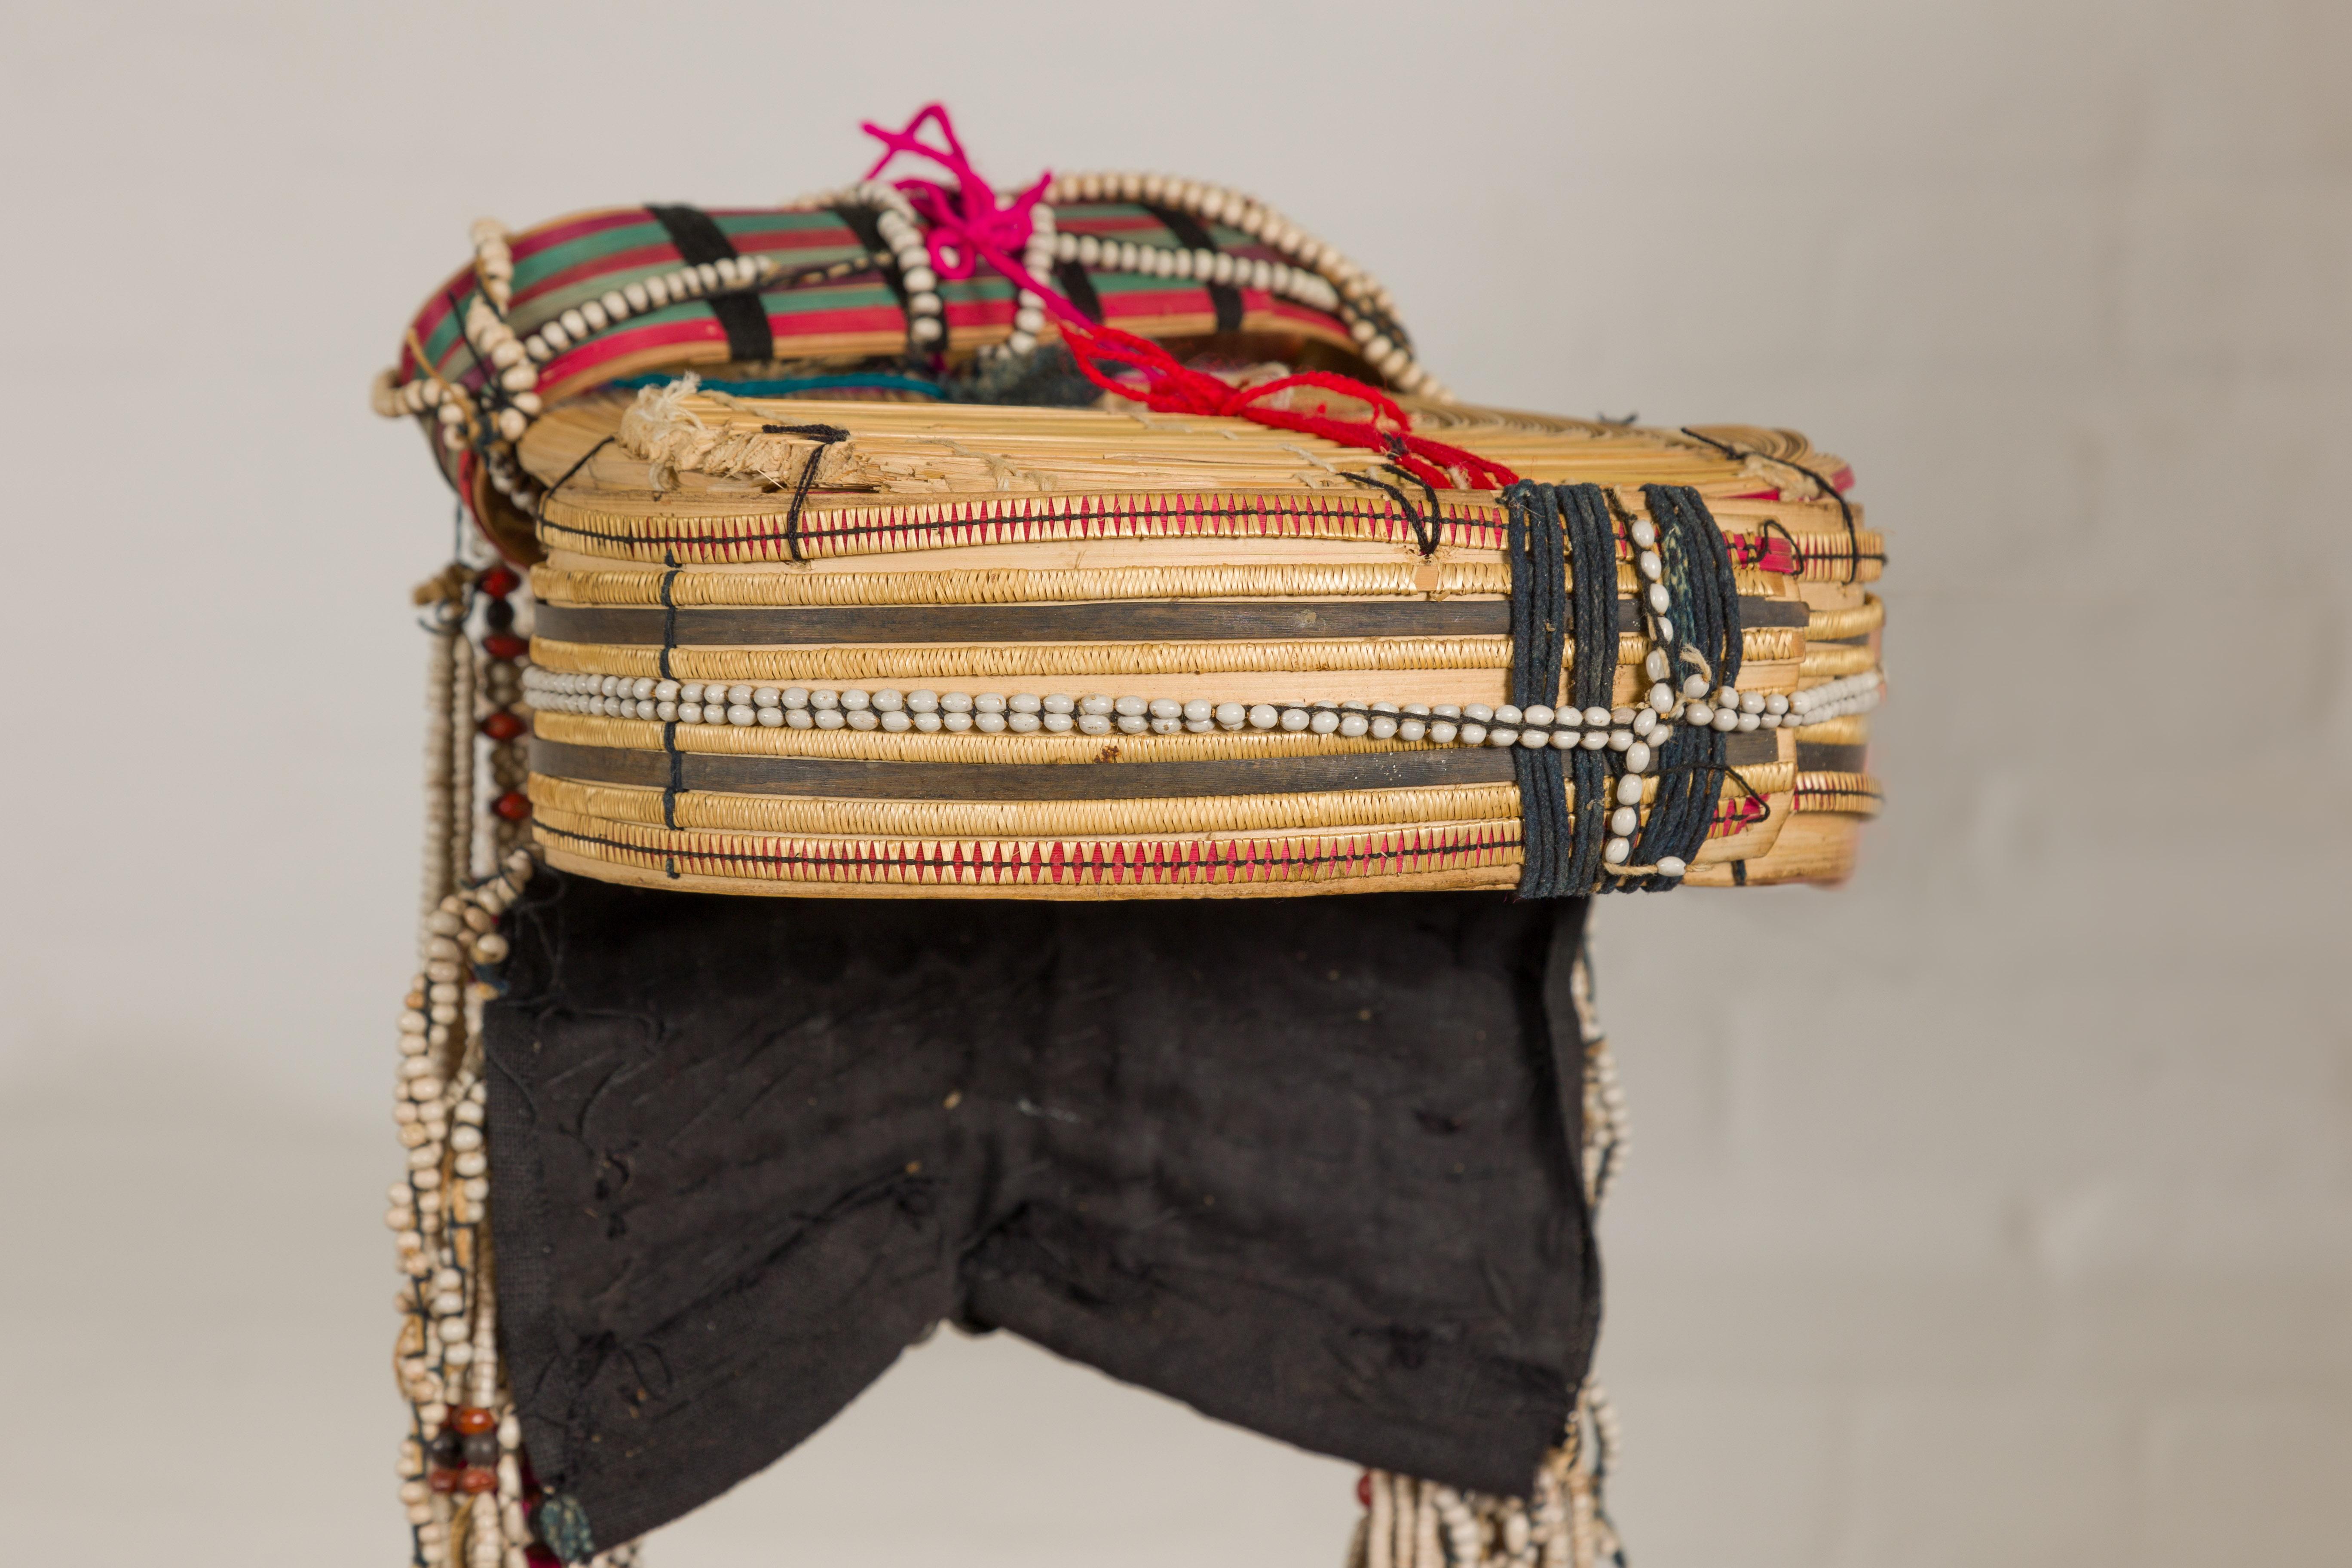 A Ulo Akha woman's Tribal headdress adorned with framework of bamboo, beads, pompons, seeds and other unique items. Experience a rich slice of the Akha tribe's vibrant culture with this exquisite Ulo Akha woman's tribal headdress. Traditionally